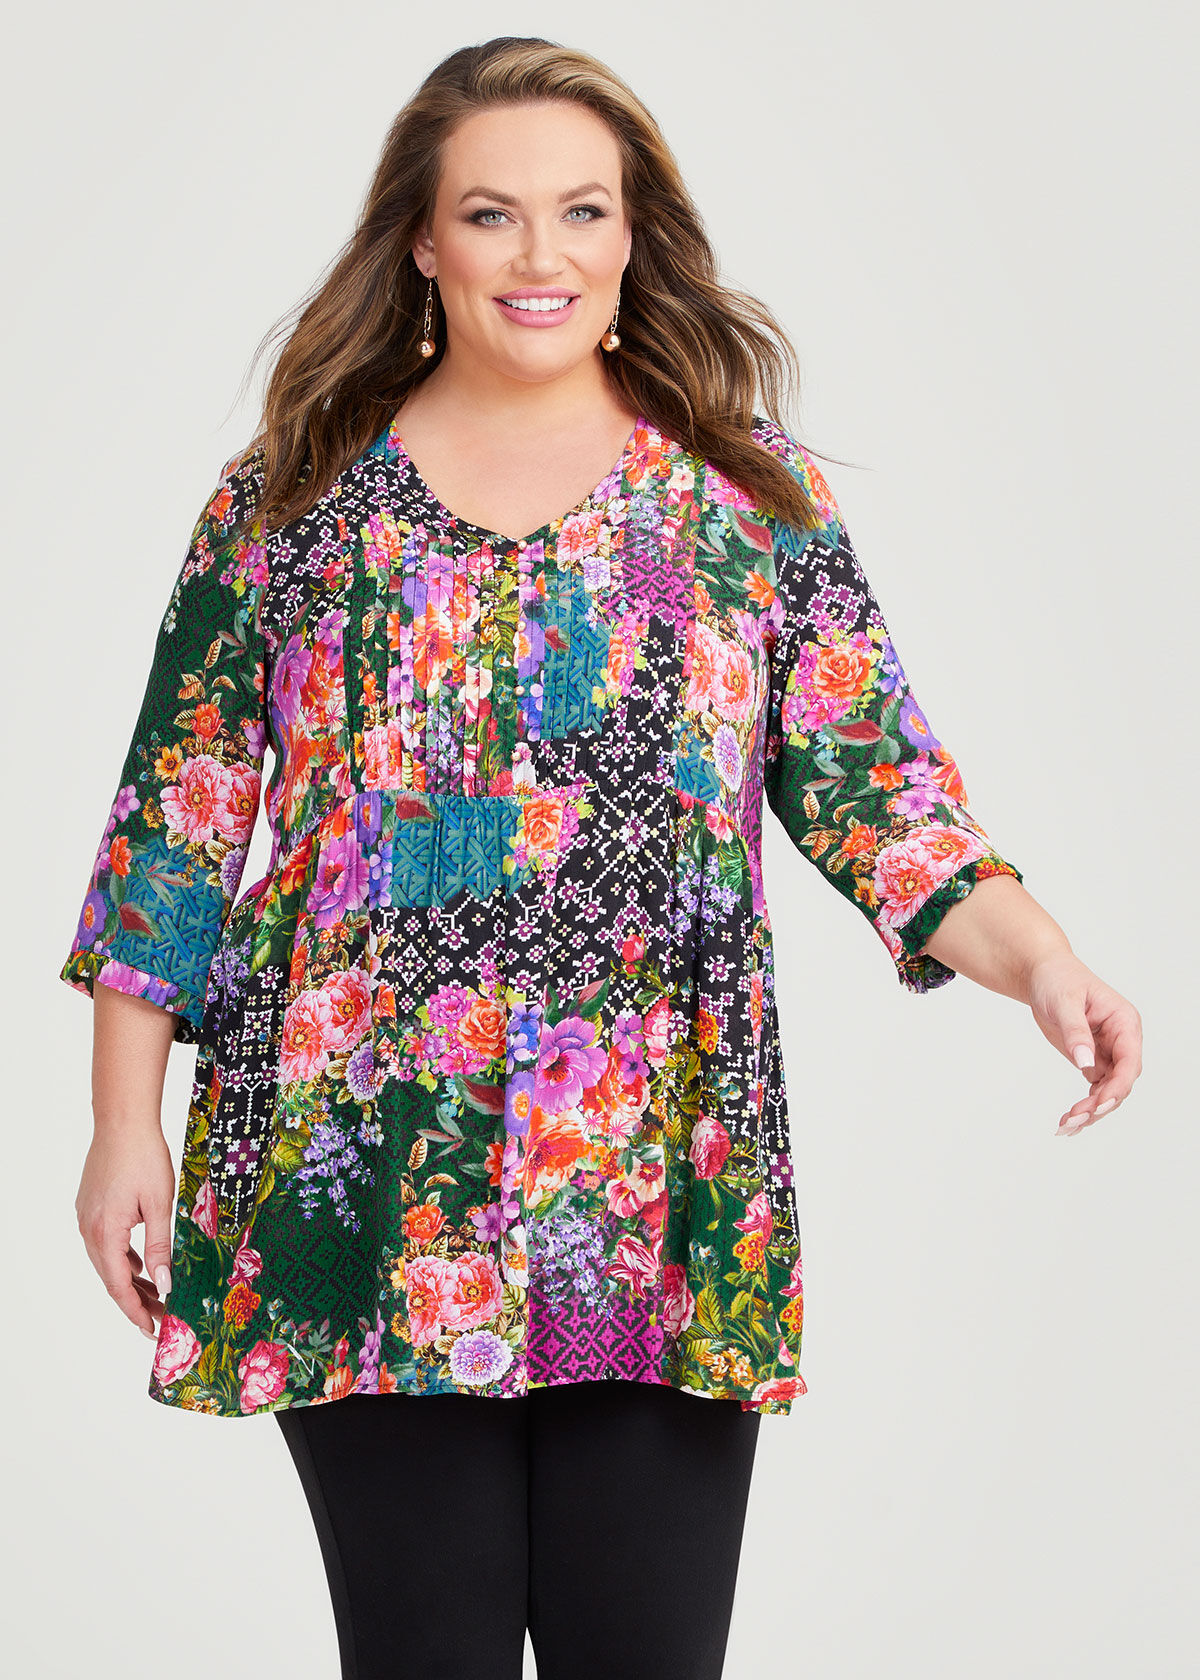 Tunics for Women - Buy Tunic Tops For Women Online in India